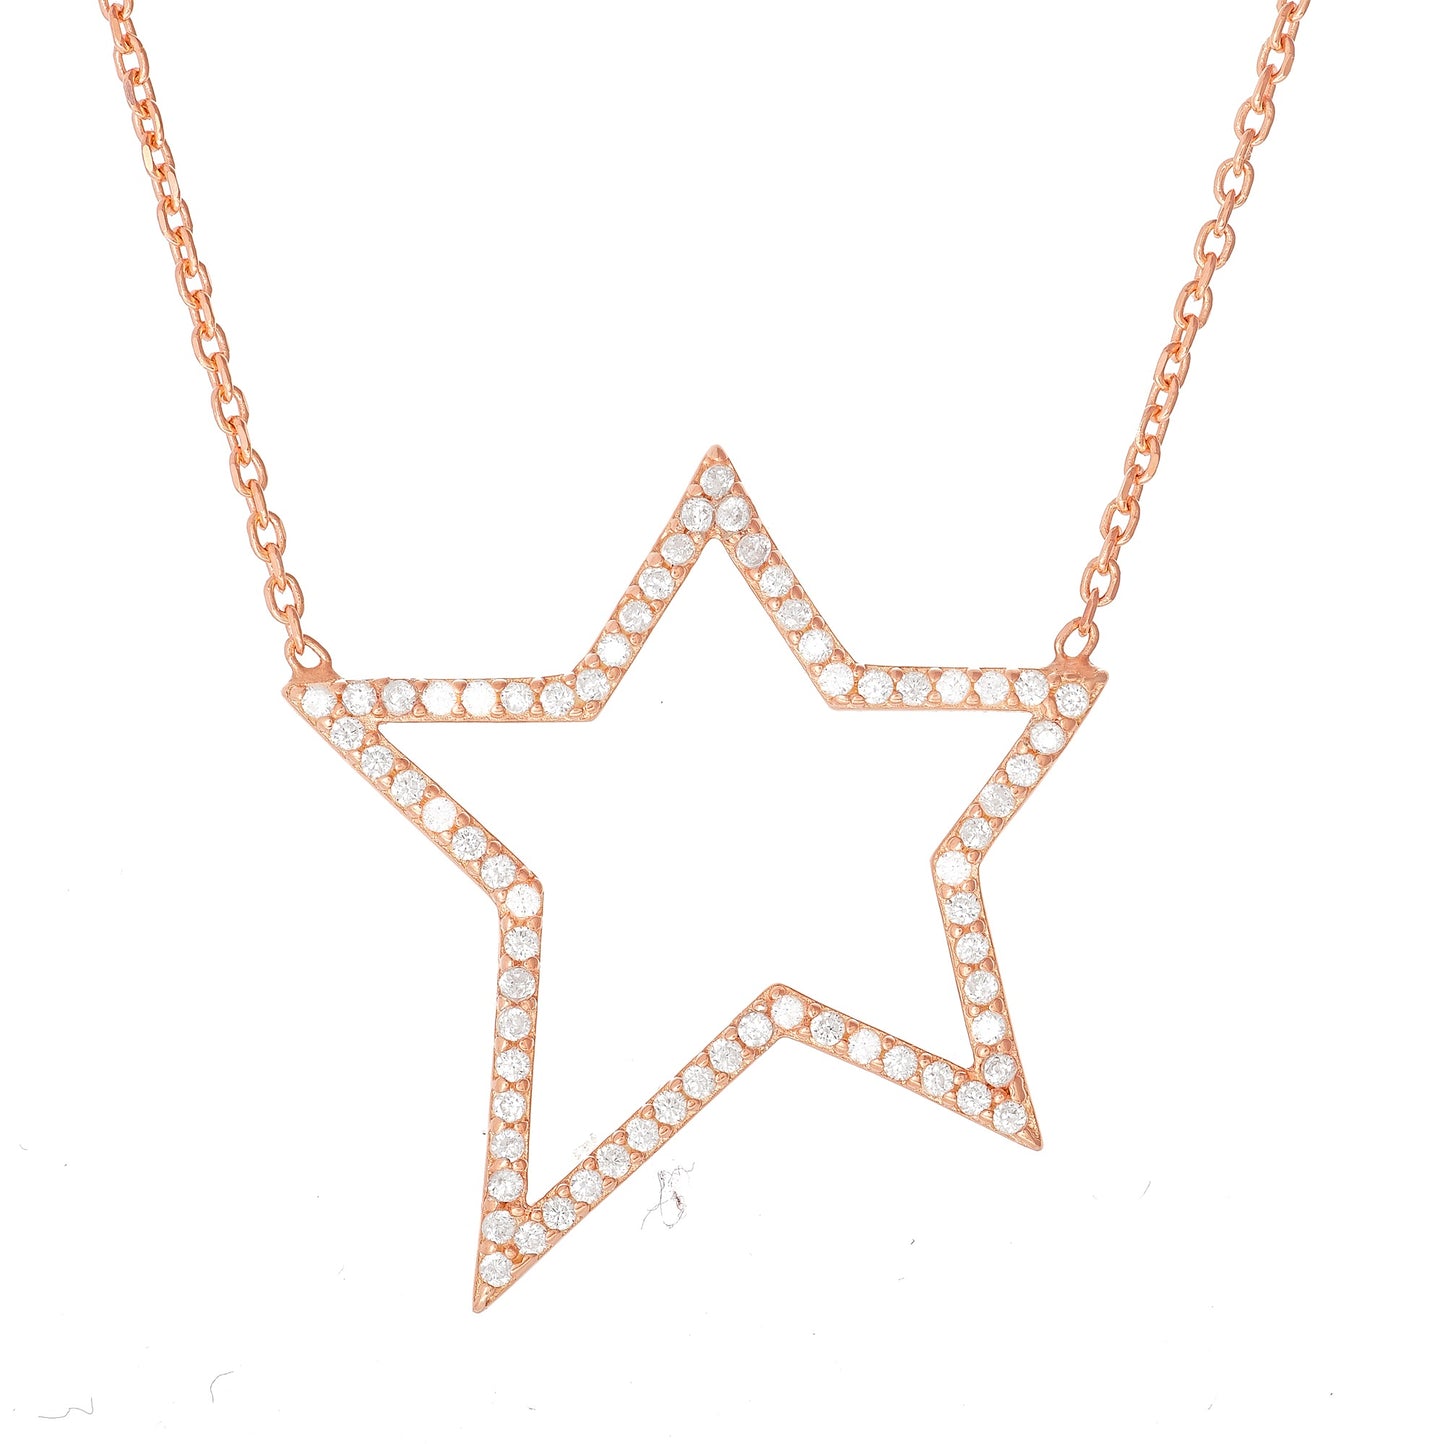 Star Necklace from "Lunch with the Stars" Collection